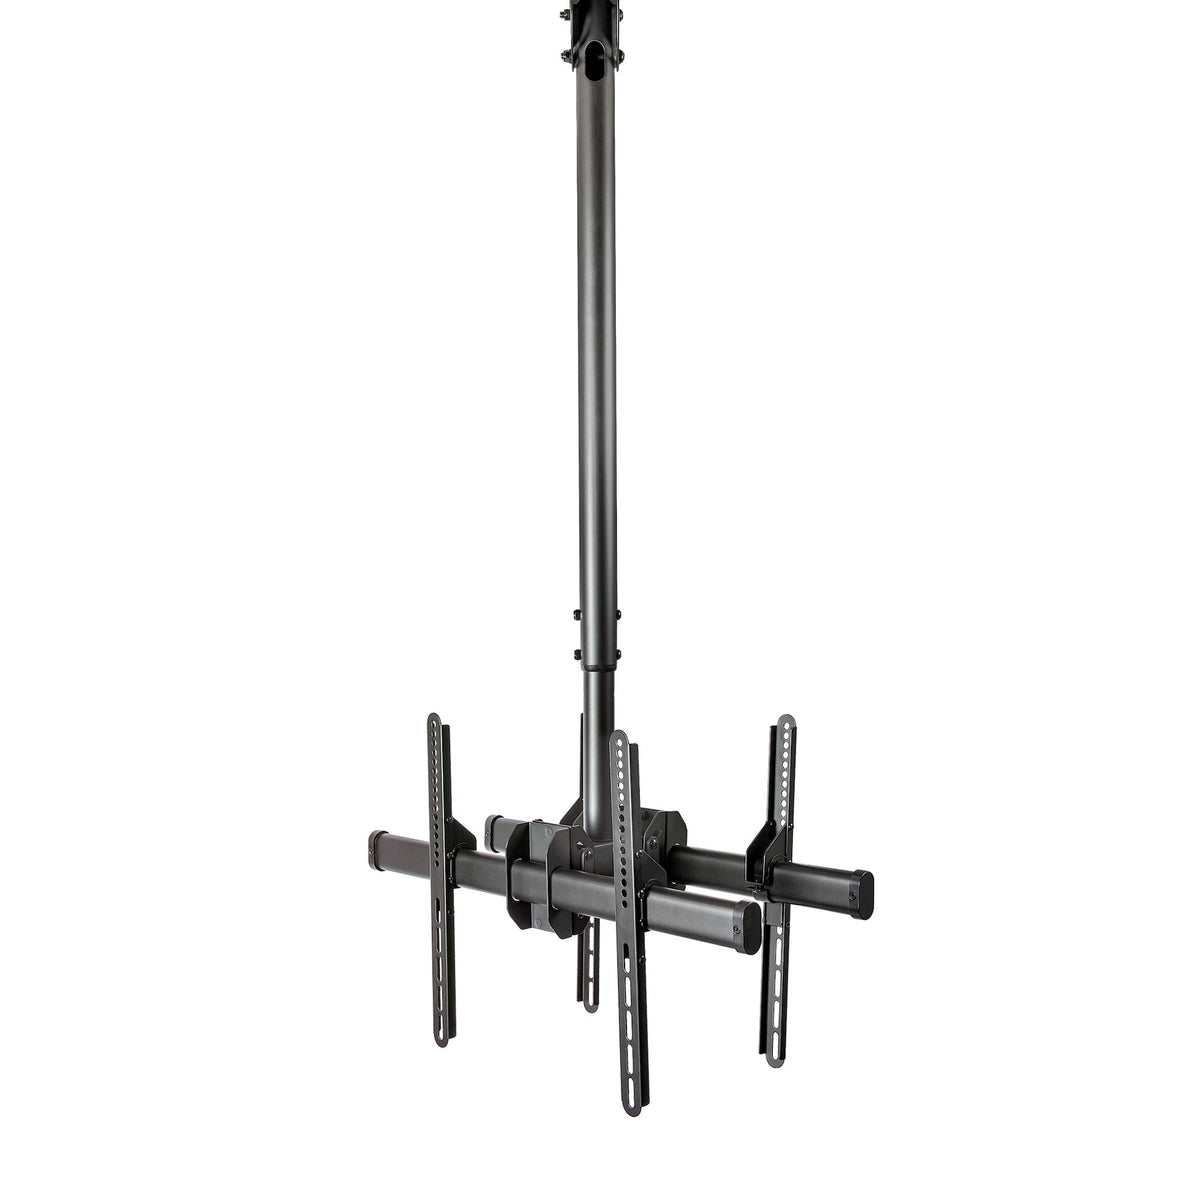 StarTech.com Dual TV Ceiling Mount - Back-to-Back Heavy Duty Hanging Dual Screen Mount with Adjustable Telescopic 3.5' to 5' Pole - Tilt/Swivel/Rotate - VESA Bracket for 32”-75" Displays